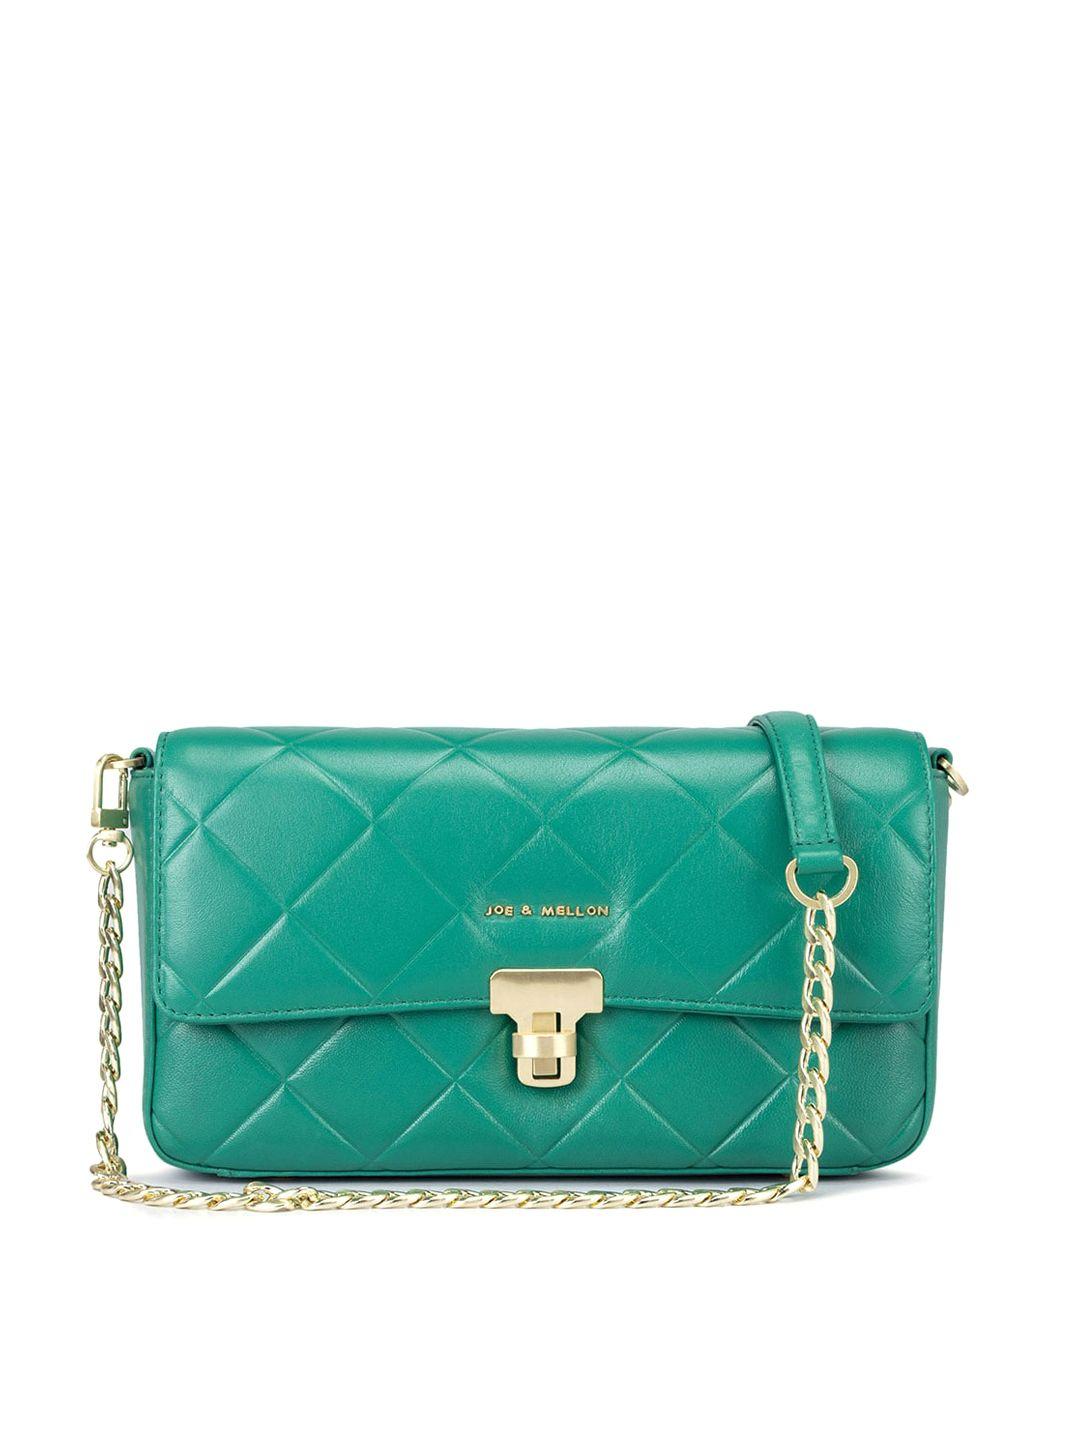 joe & mellon textured leather structured shoulder bag with quilted